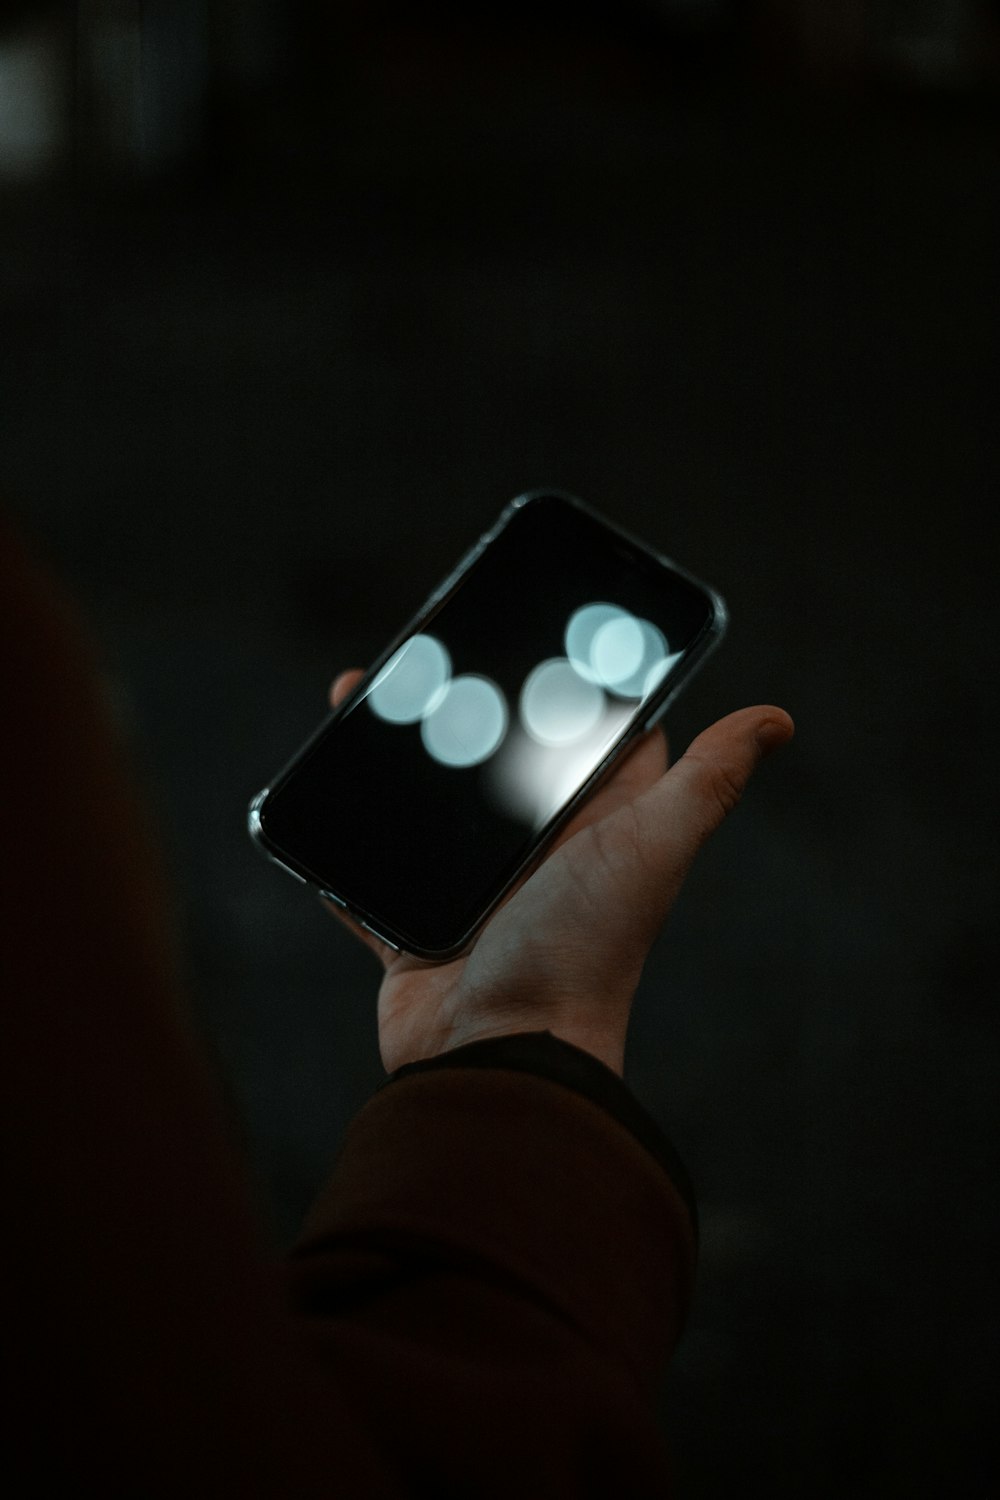 person holding black iphone 5